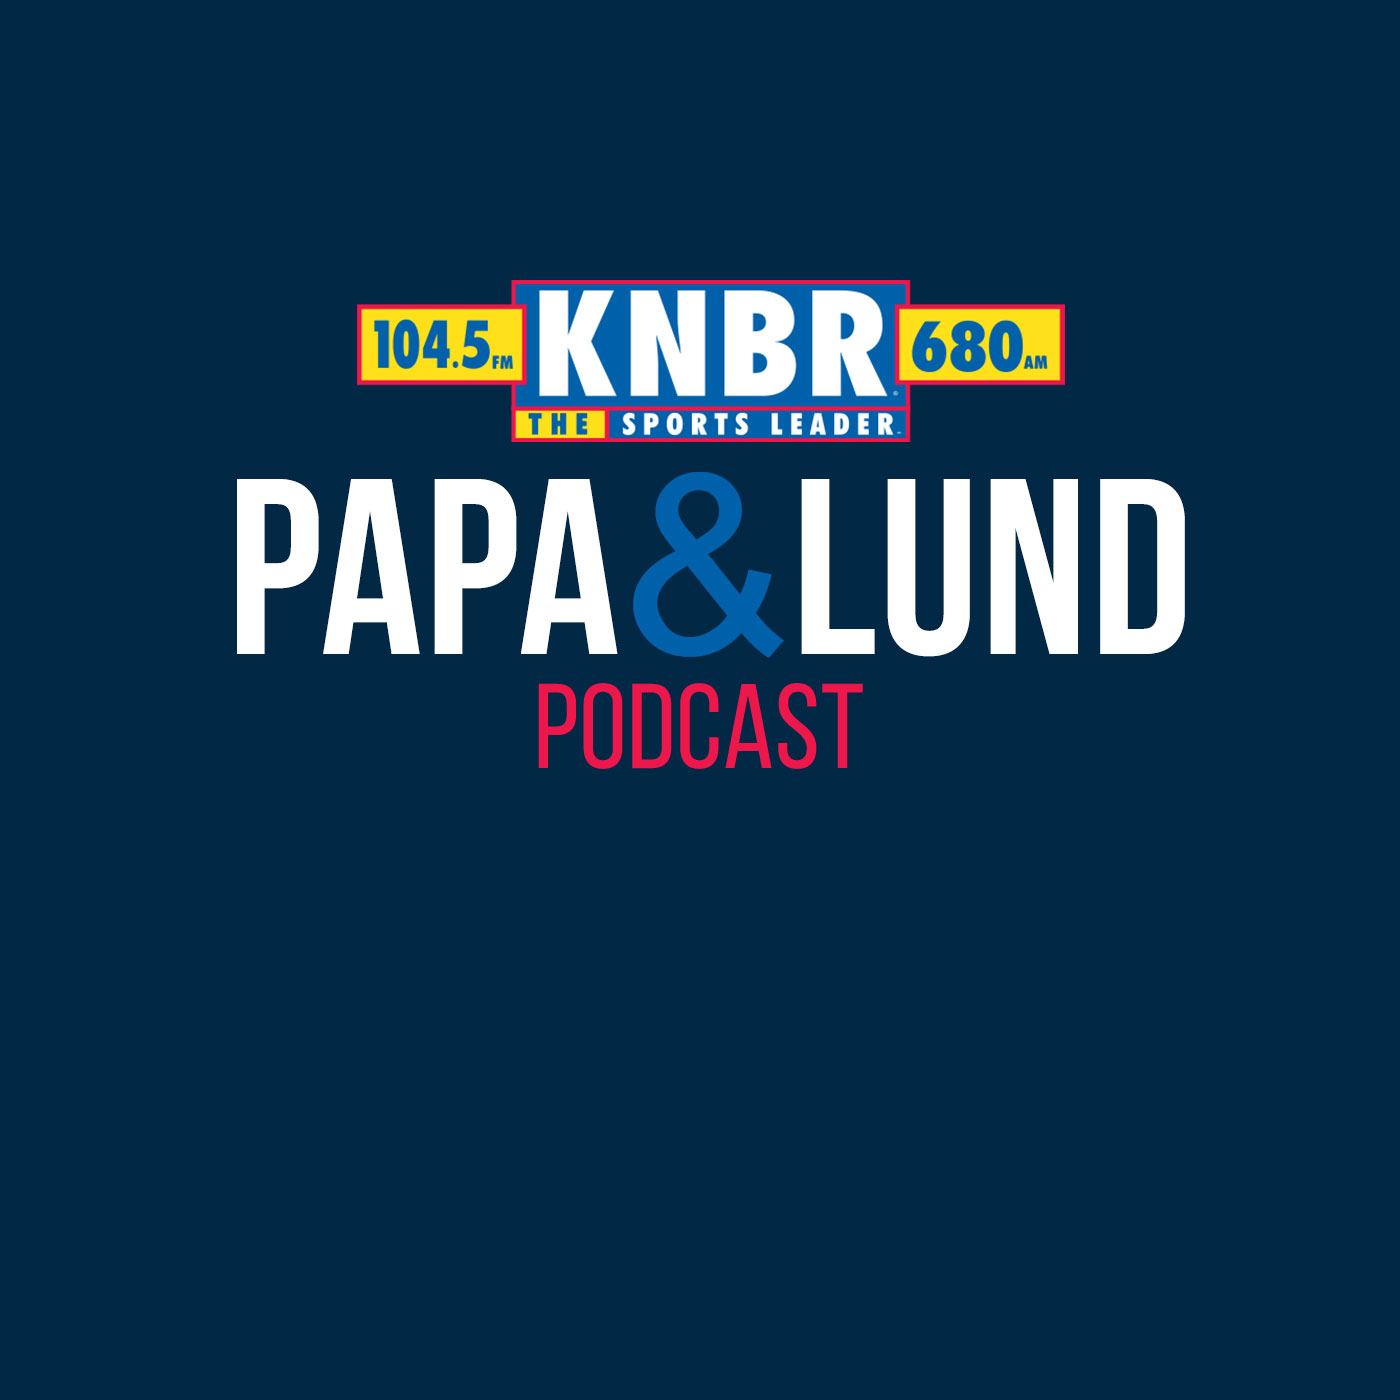 5-12 Ramona Shelburne tells Papa & Lund how the Warriors can win Game 6 and extend the series